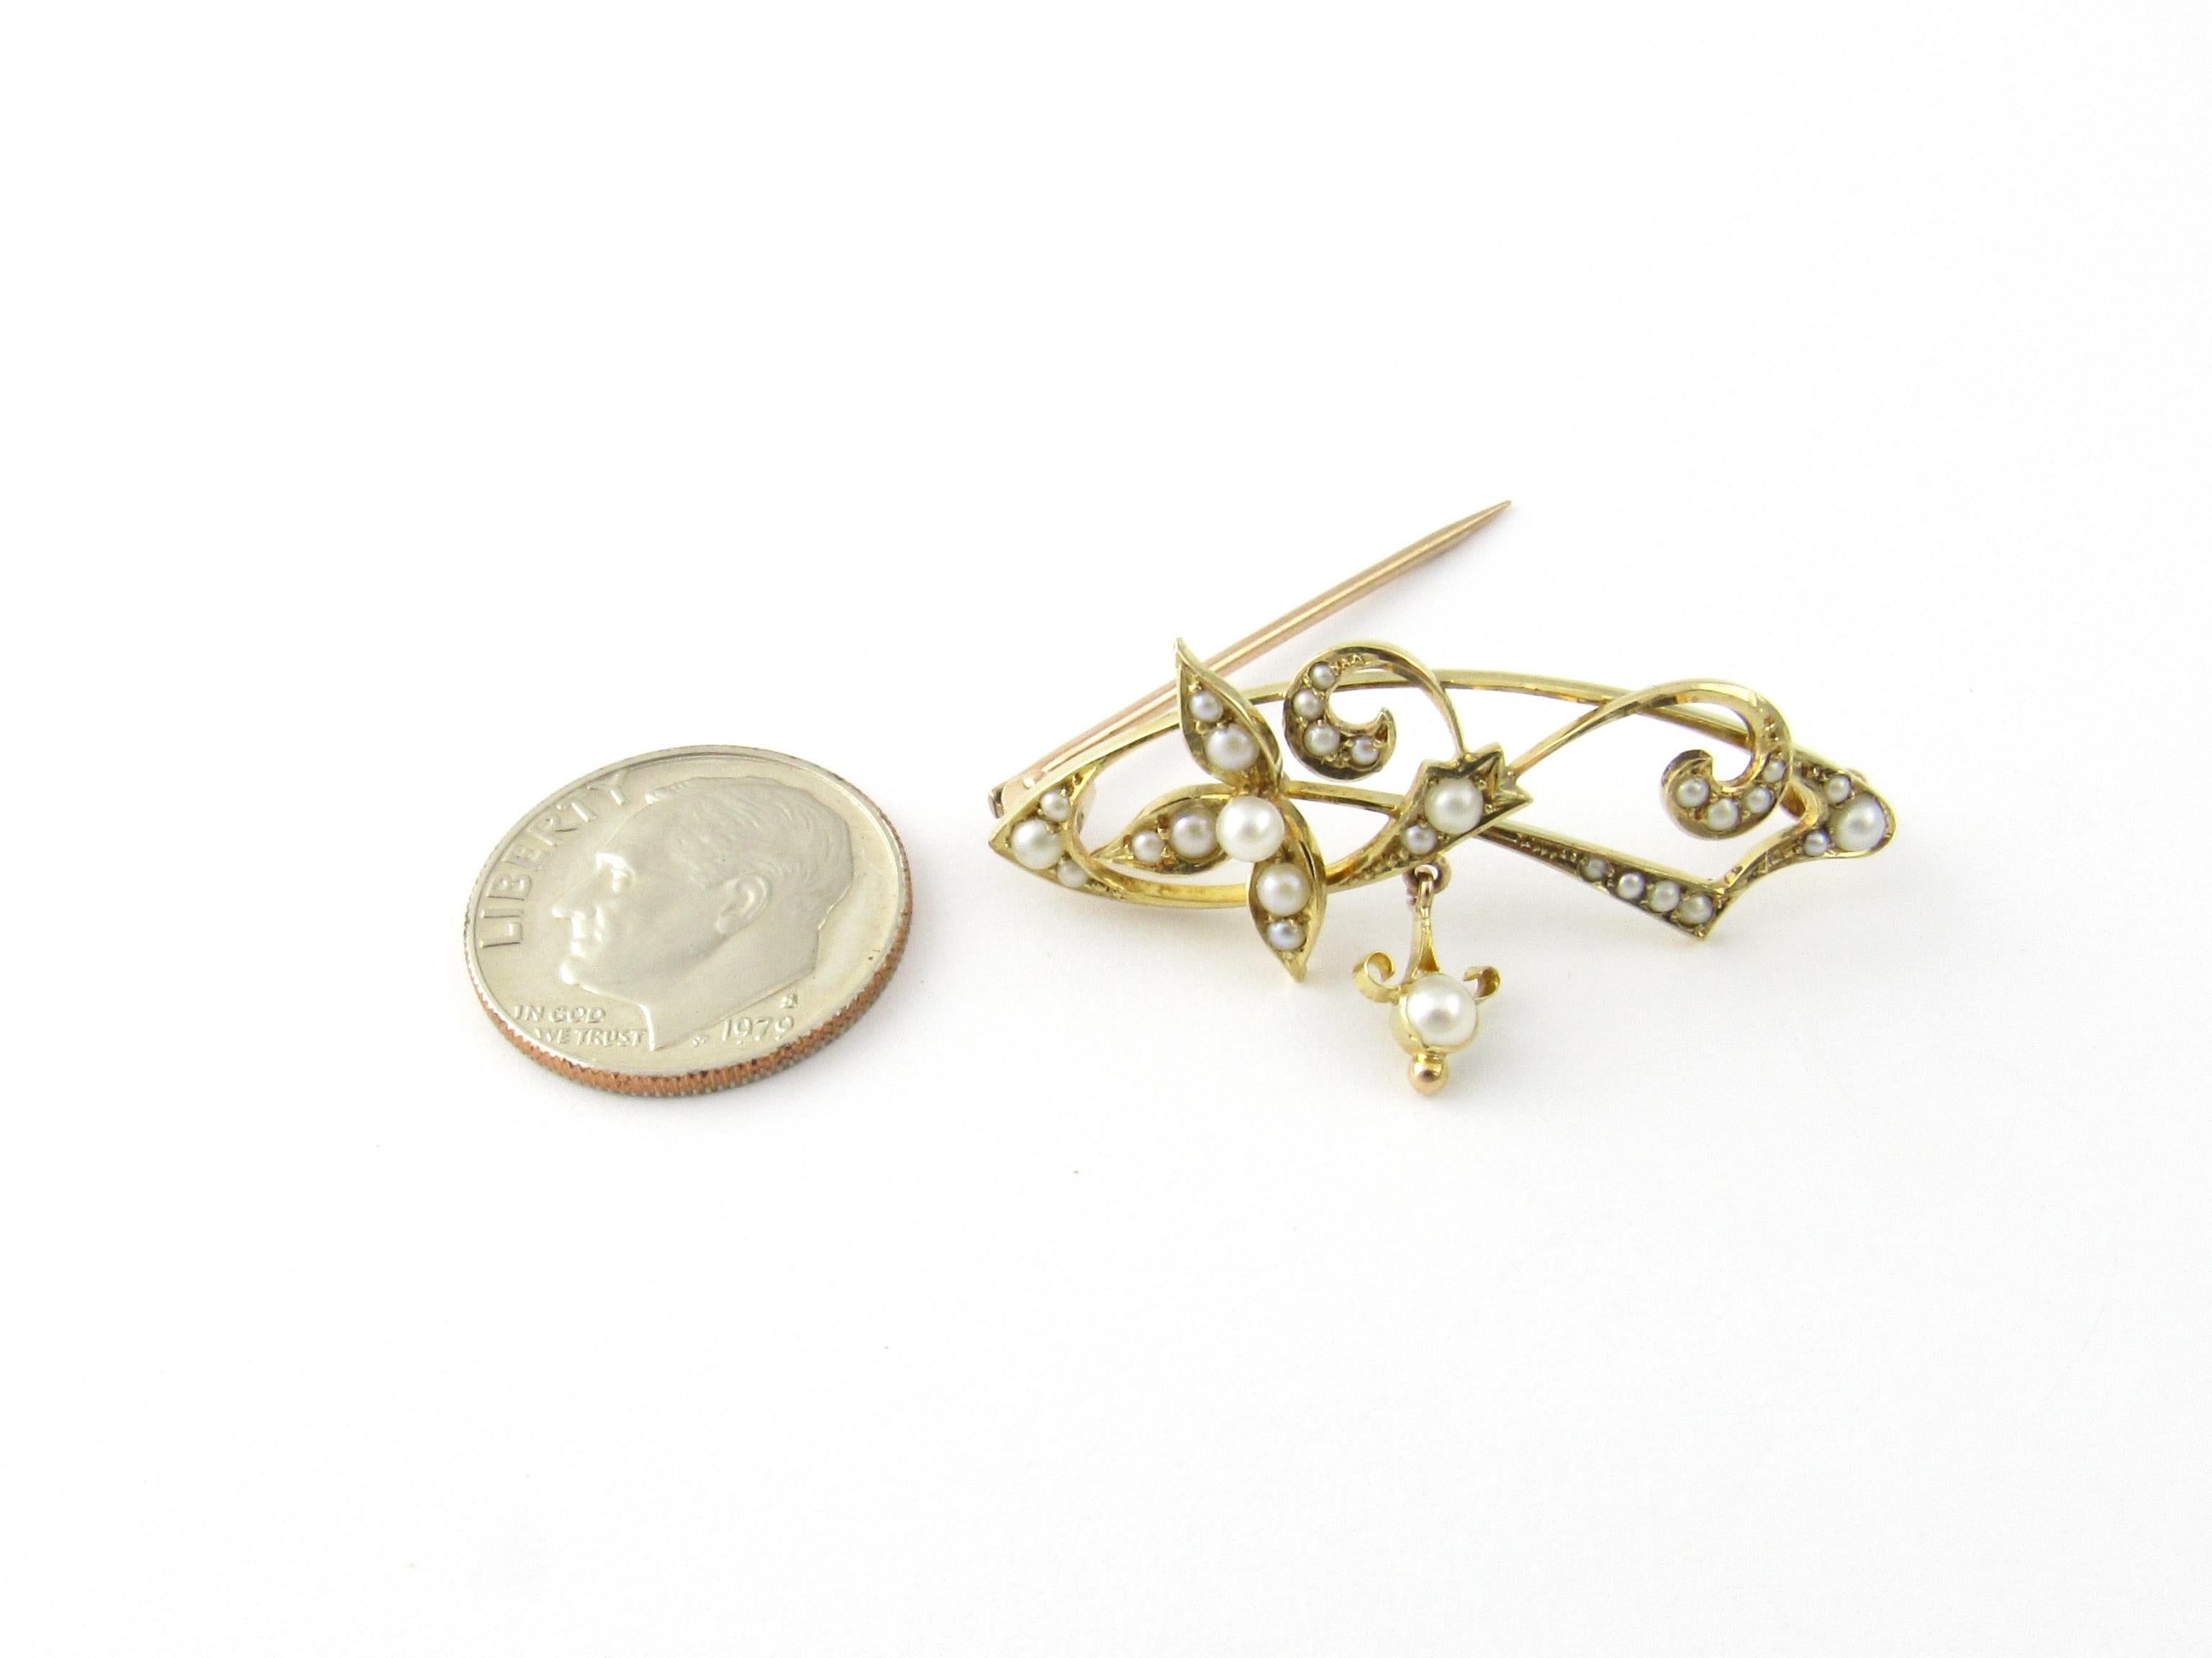 Women's 15 Karat Yellow Gold and Seed Pearl Brooch